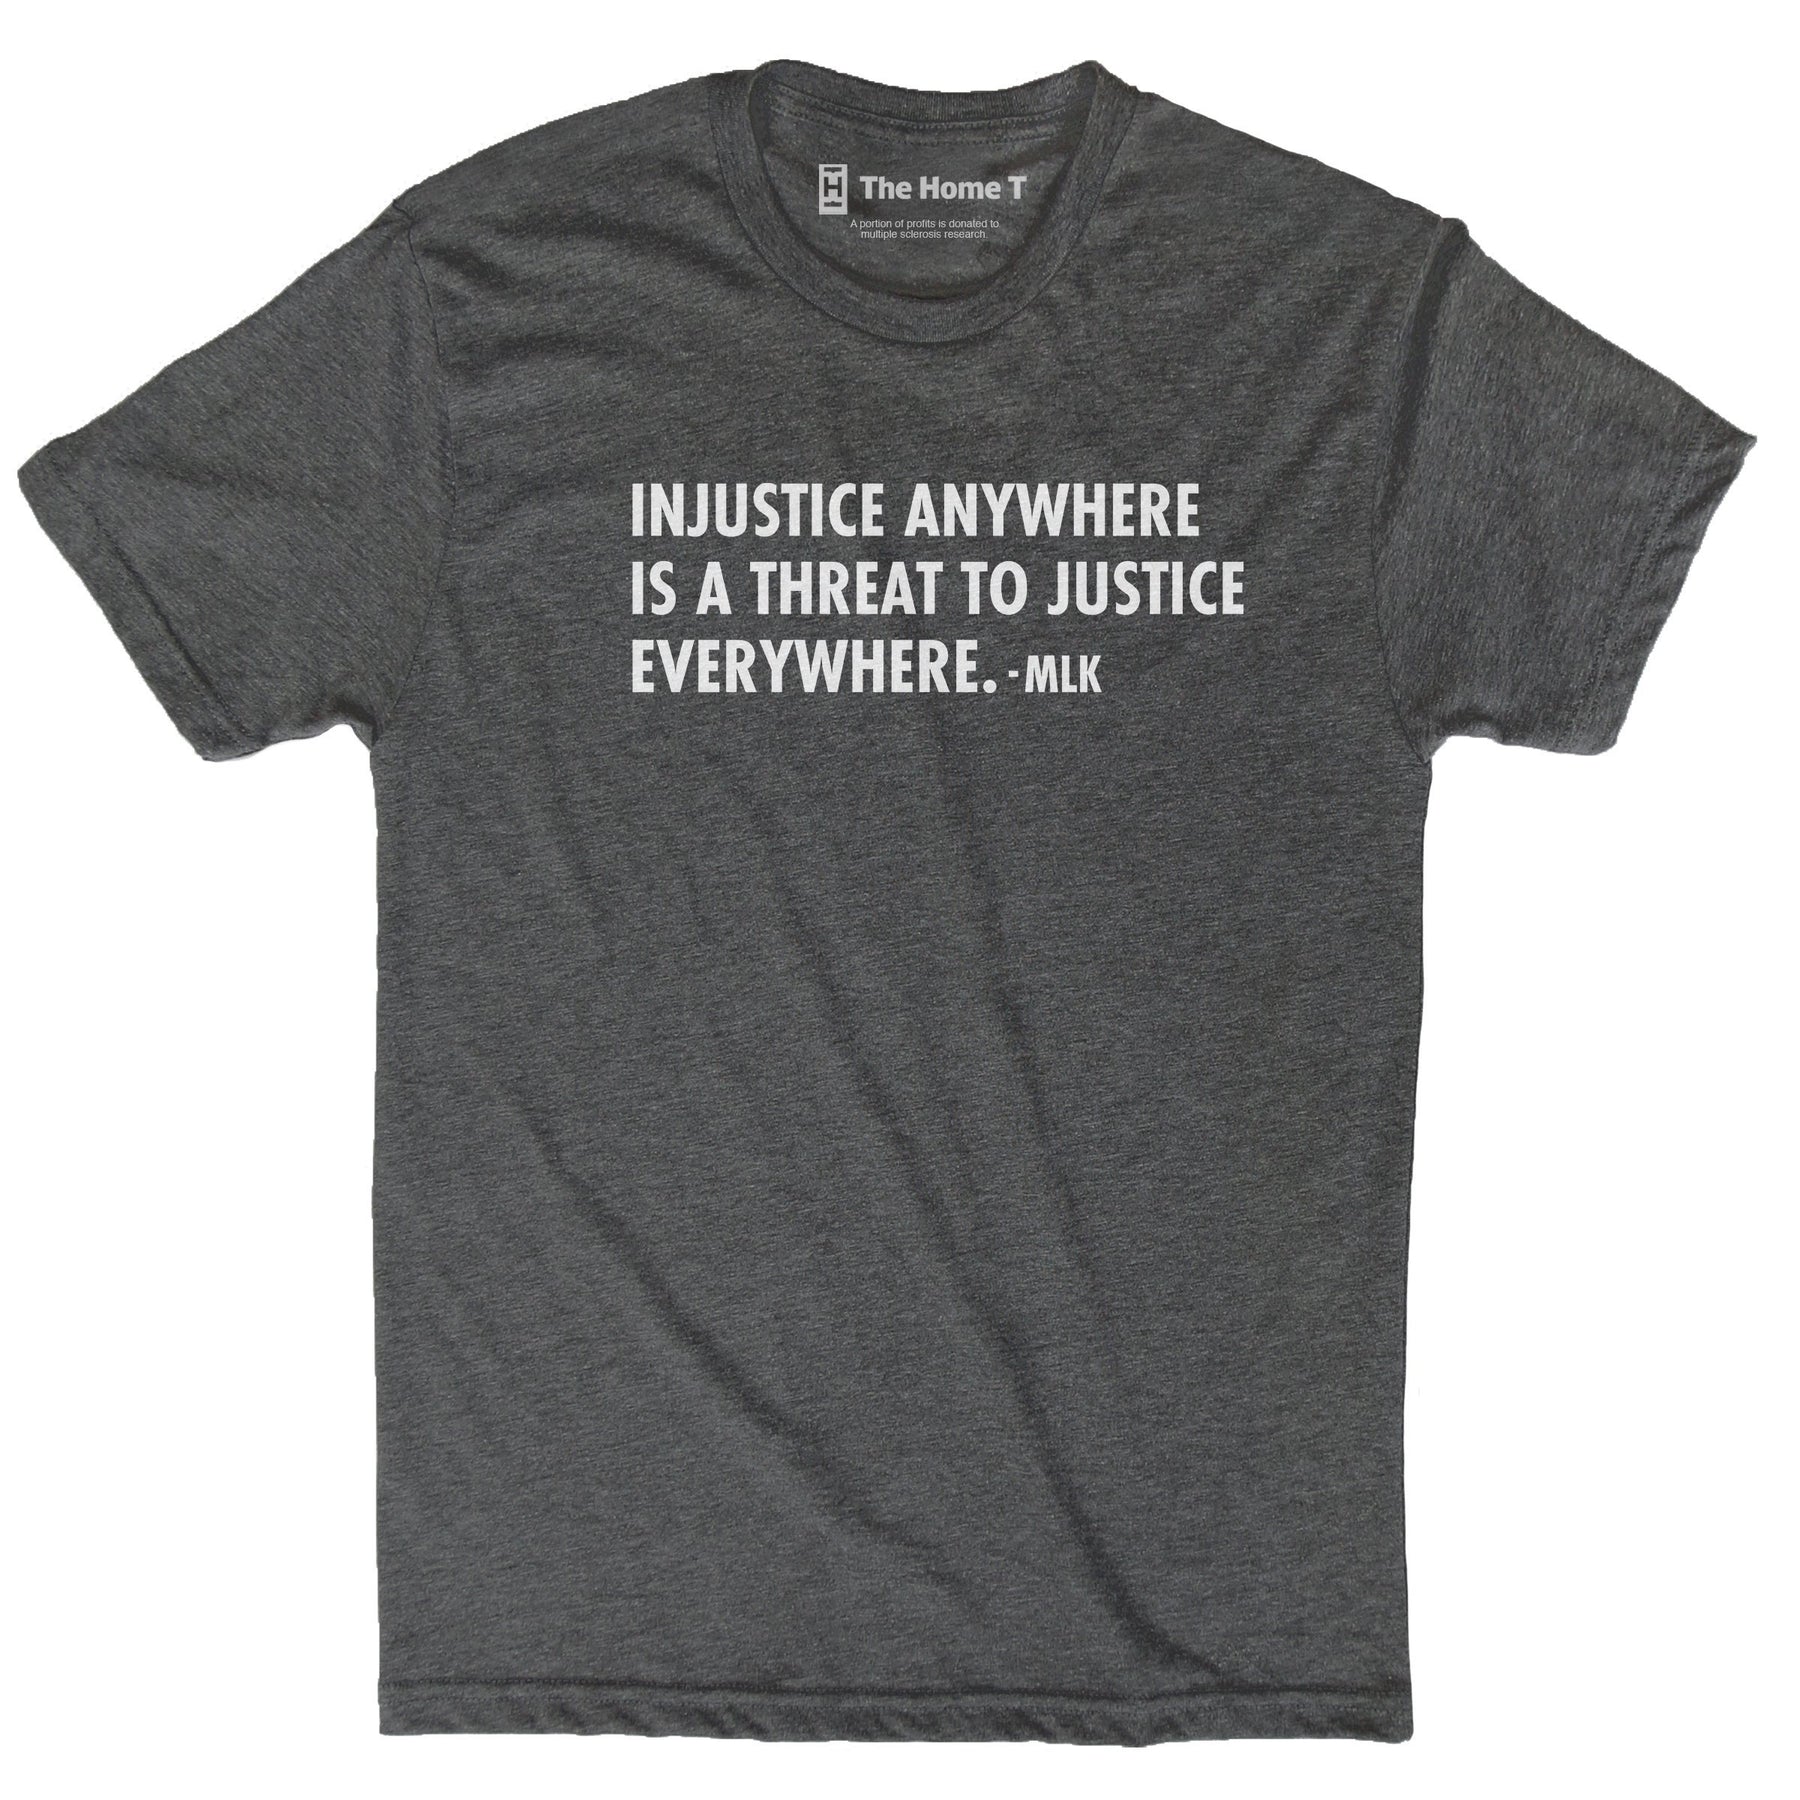 Injustice anywhere is a threat to justice everywhere. -MLK. Dark grey crew